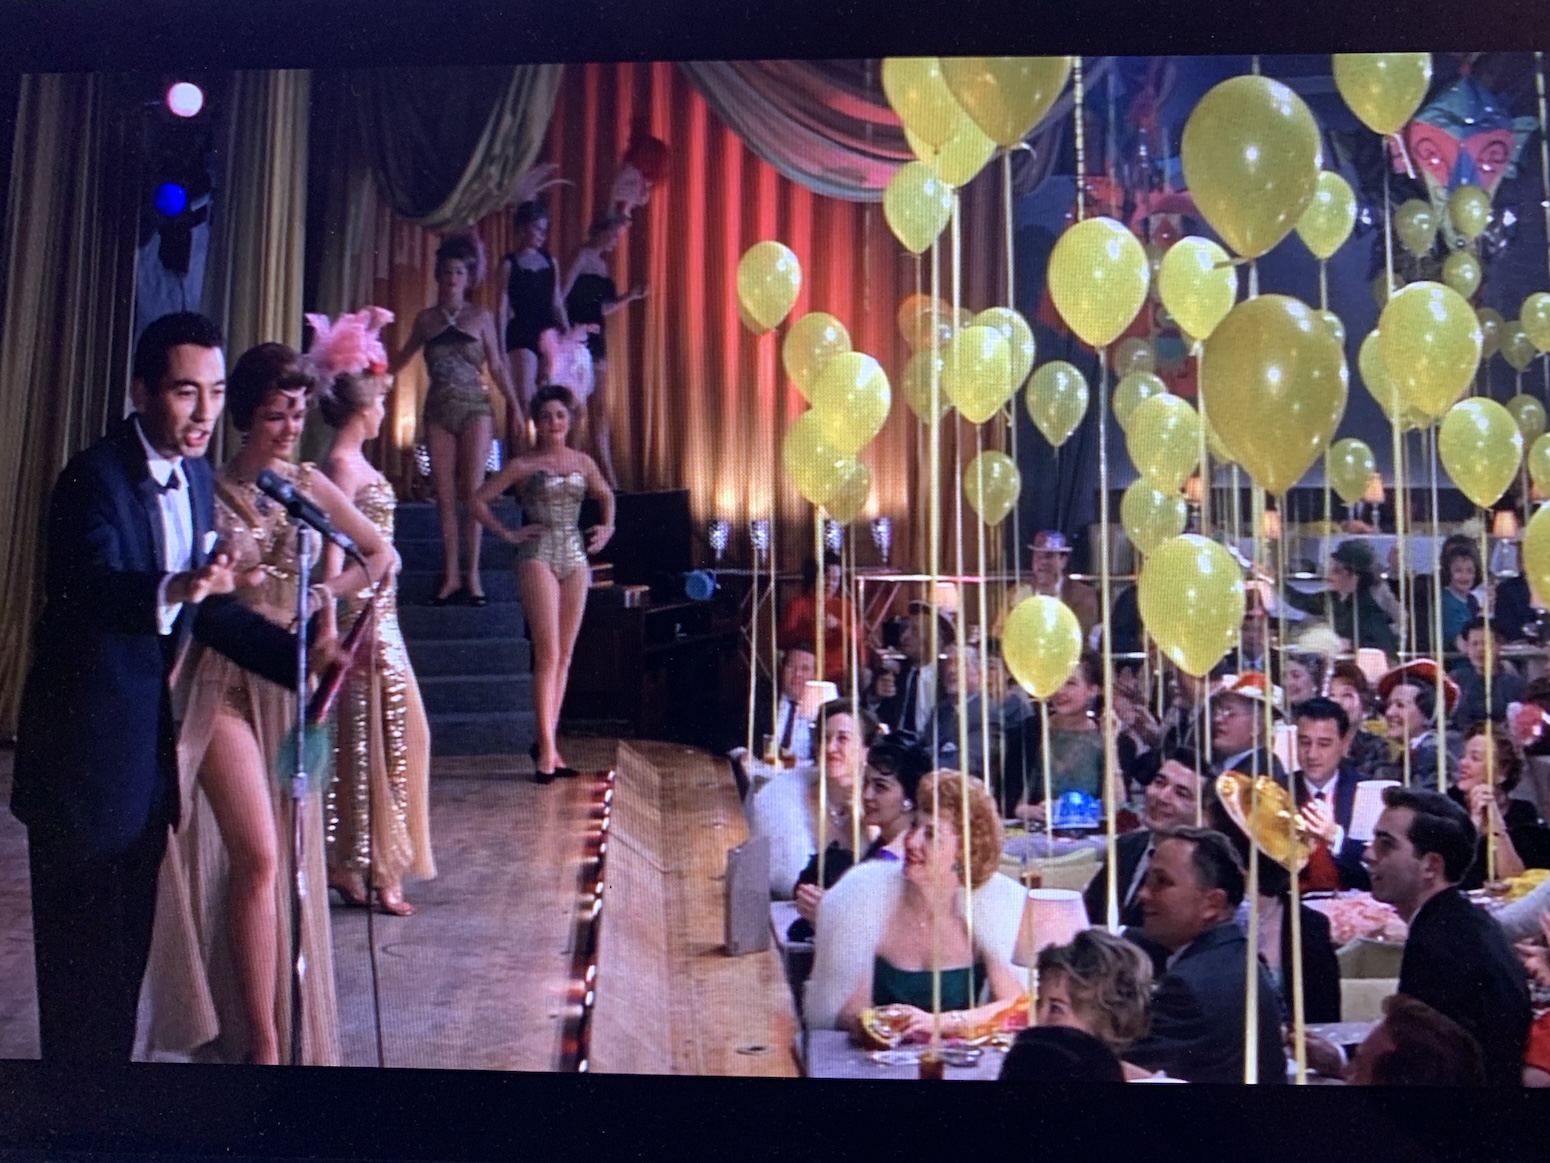 Party scene with yellow balloons at every table and showgirls on stage at the left with an emcee speaking into a stand microphone.  